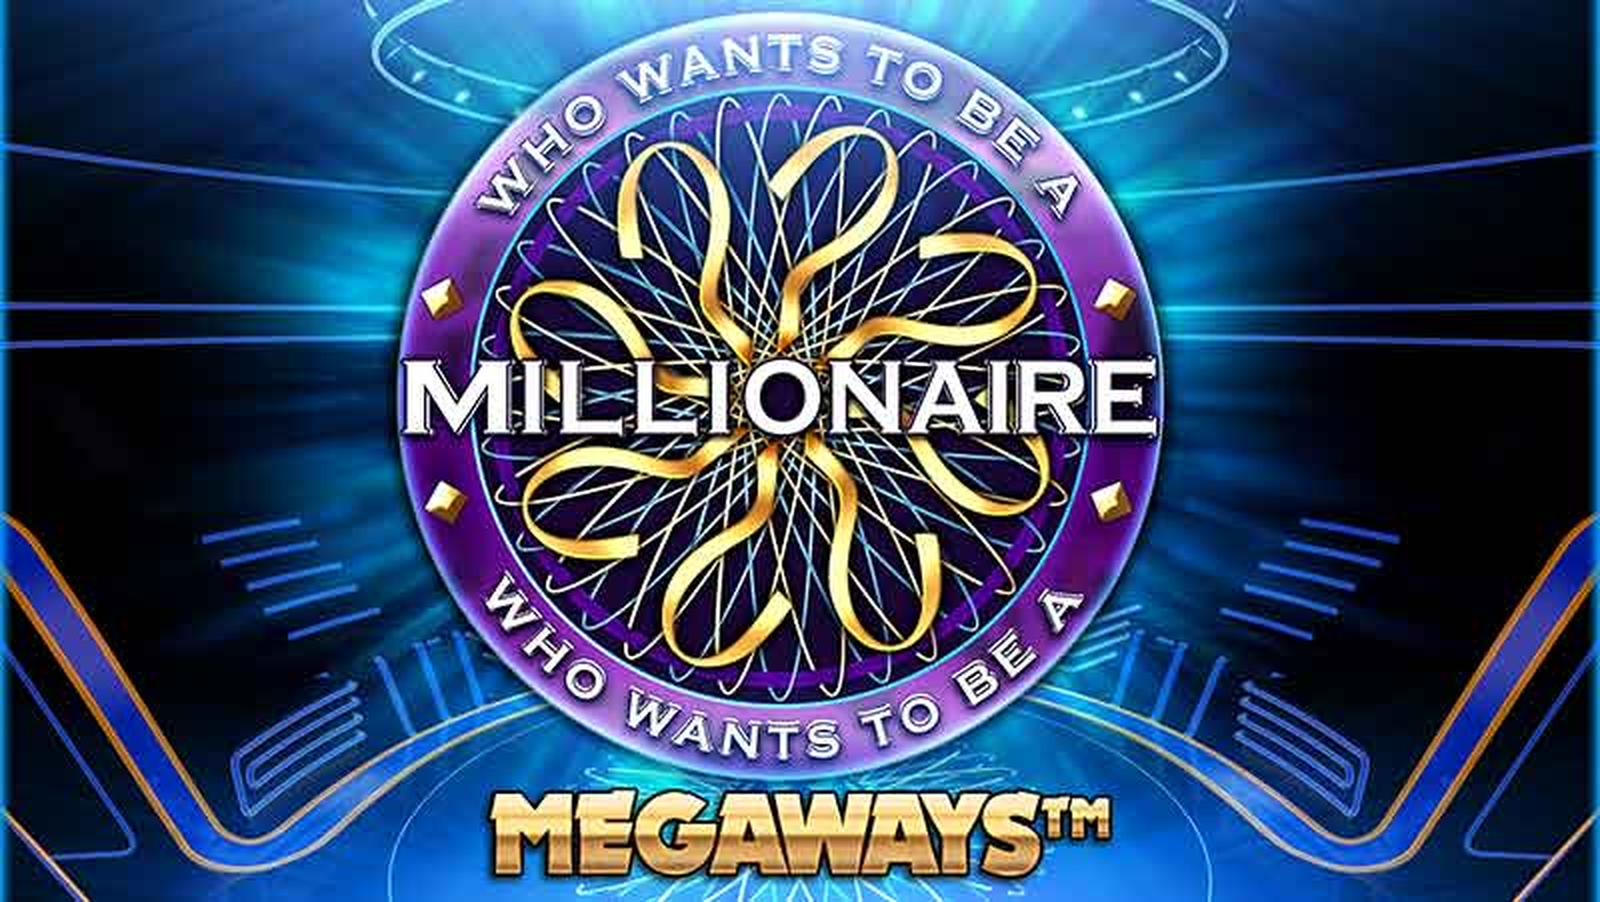 Who Wants To Be A Millionaire Megaways demo